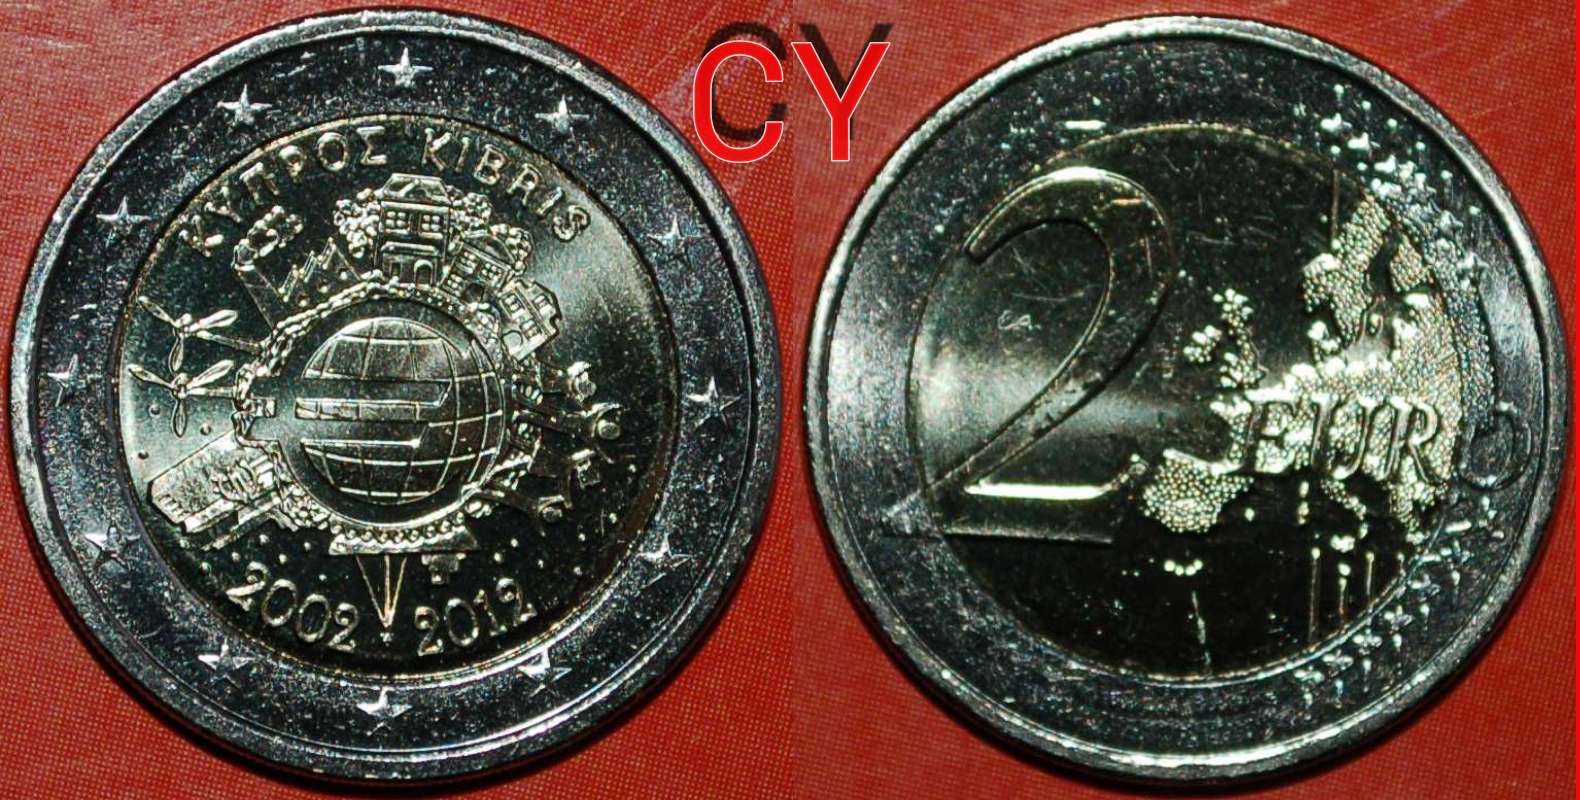  + EURO - 10 YEARS★ CYPRUS ★ 2 EURO 2012! UNC! LOW START ★ NO RESERVE!   